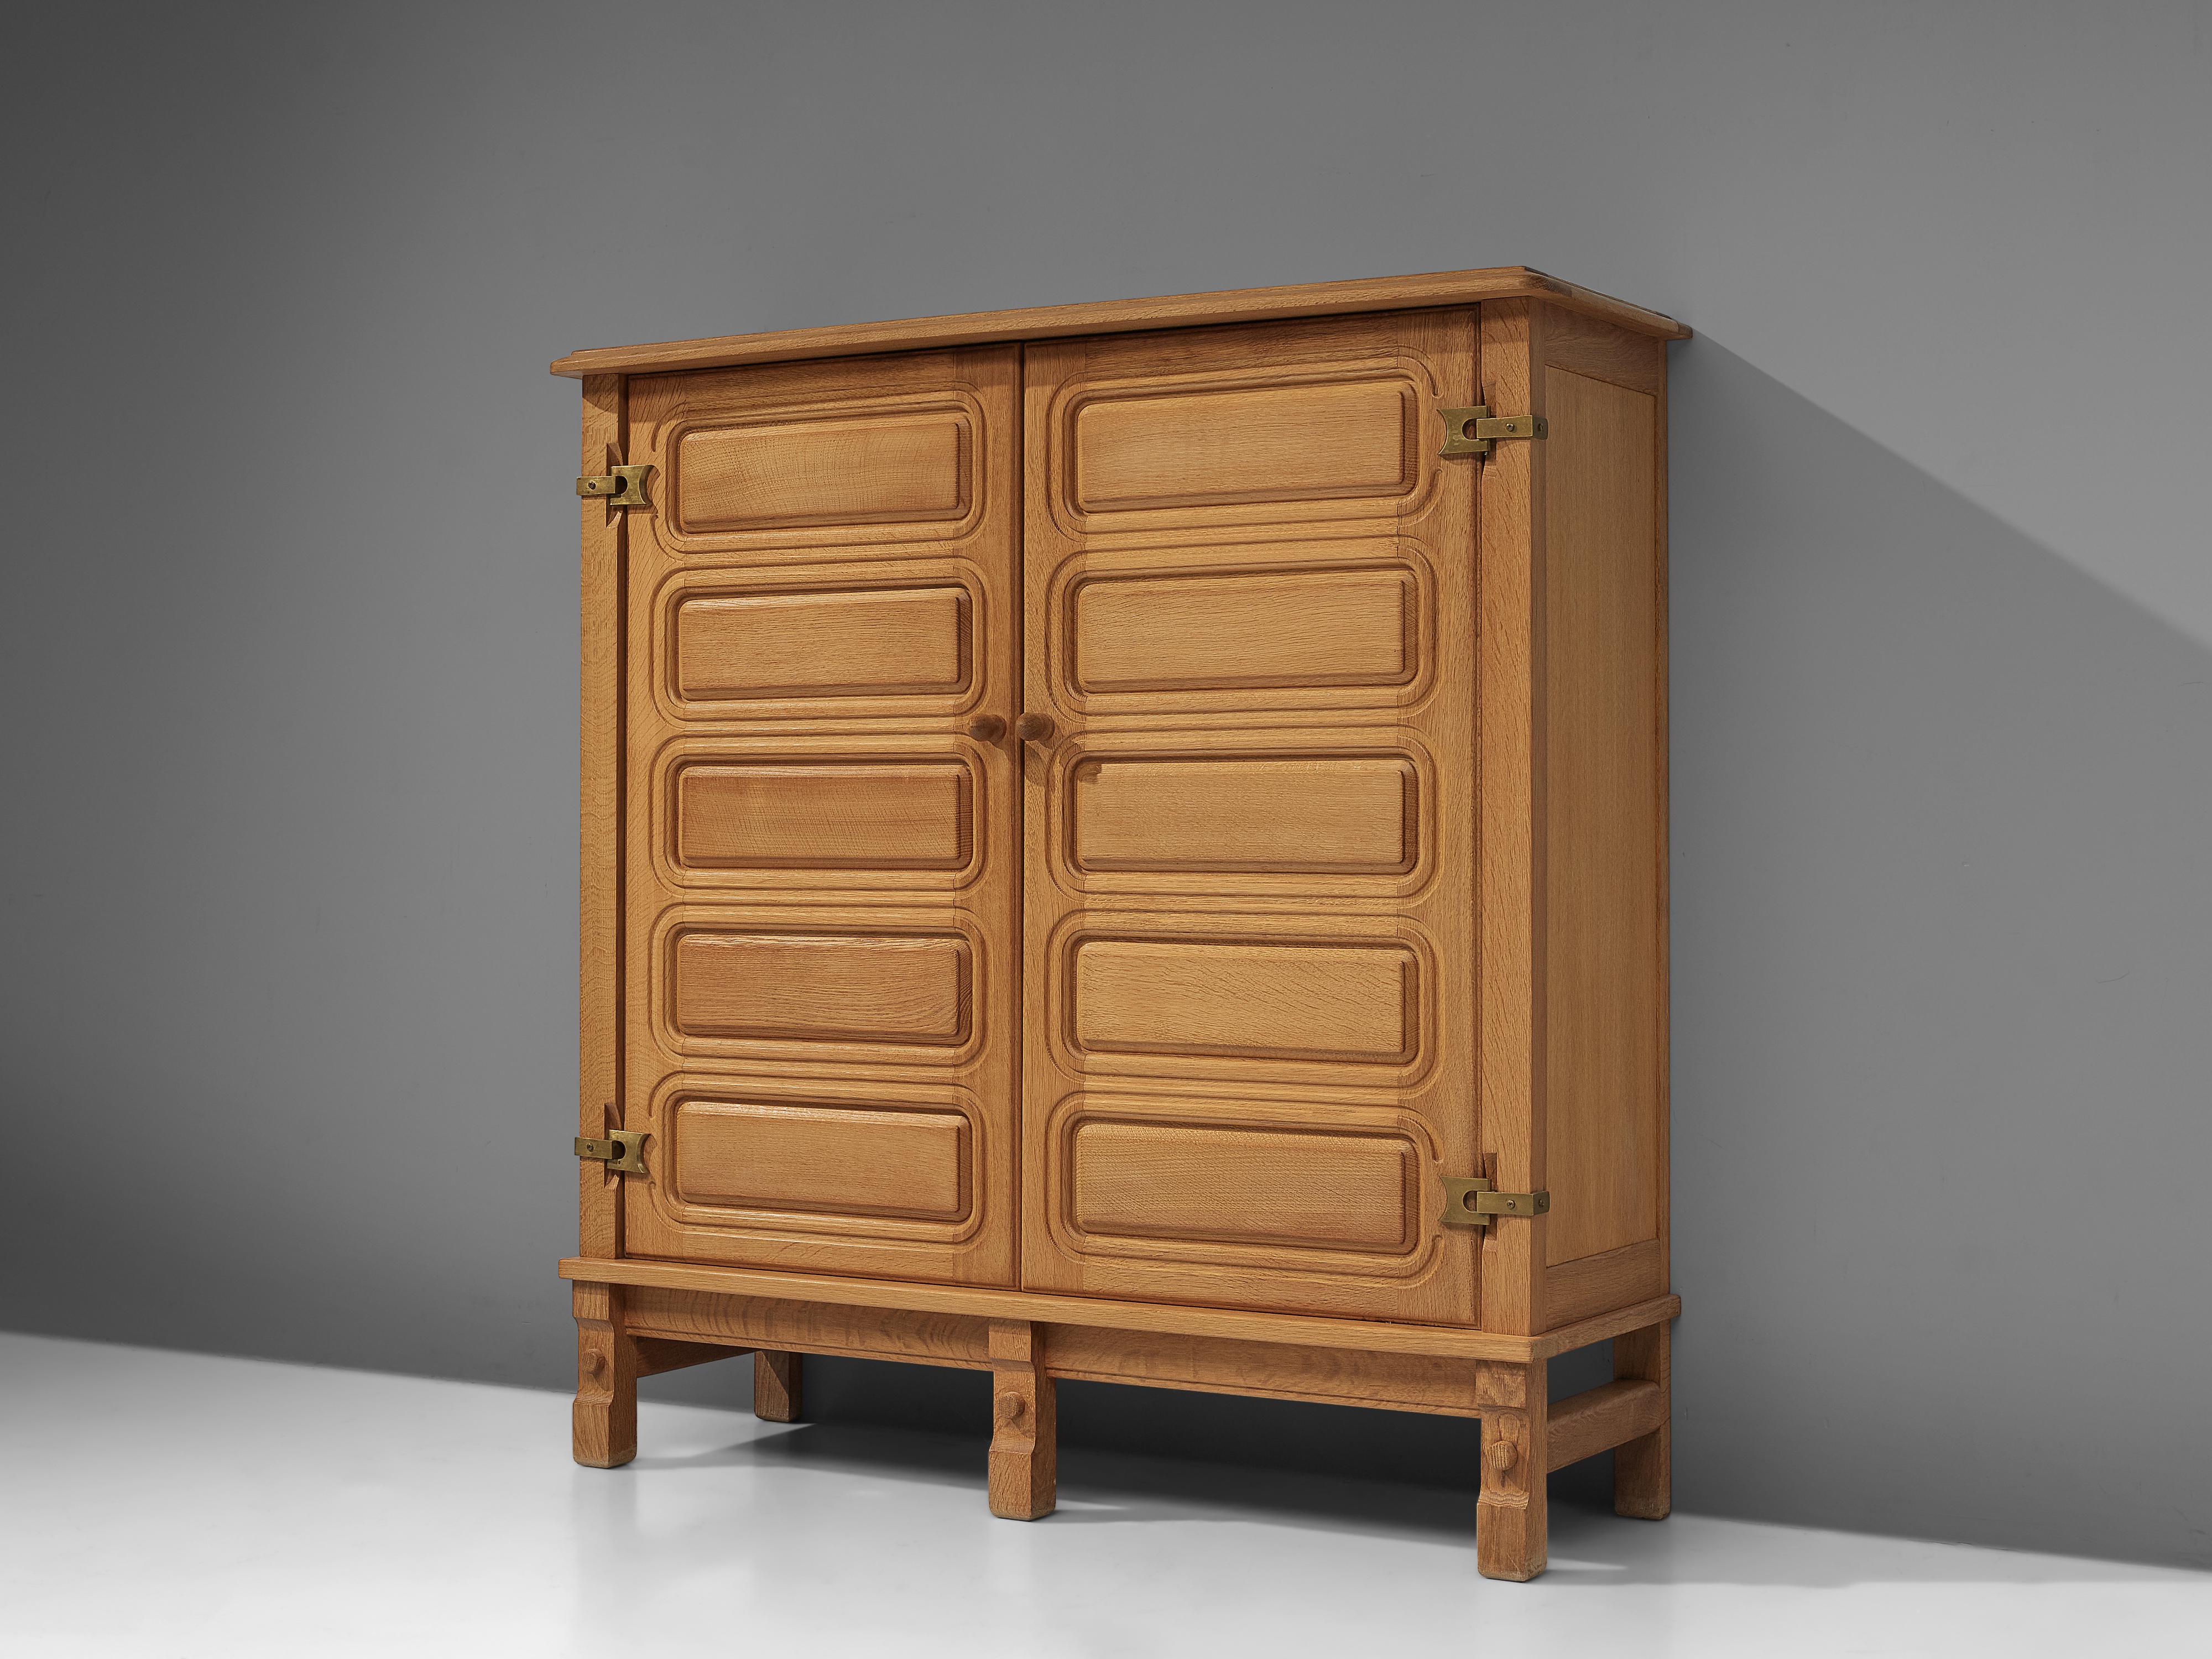 Guillerme et Chambron for Votre Maison, cabinet, oak, brass, France, 1970s.

This case piece is designed by Guillerme and Chambron and features a decorative design in the doors. The cabinet offers plenty of storage, with three shelves on both